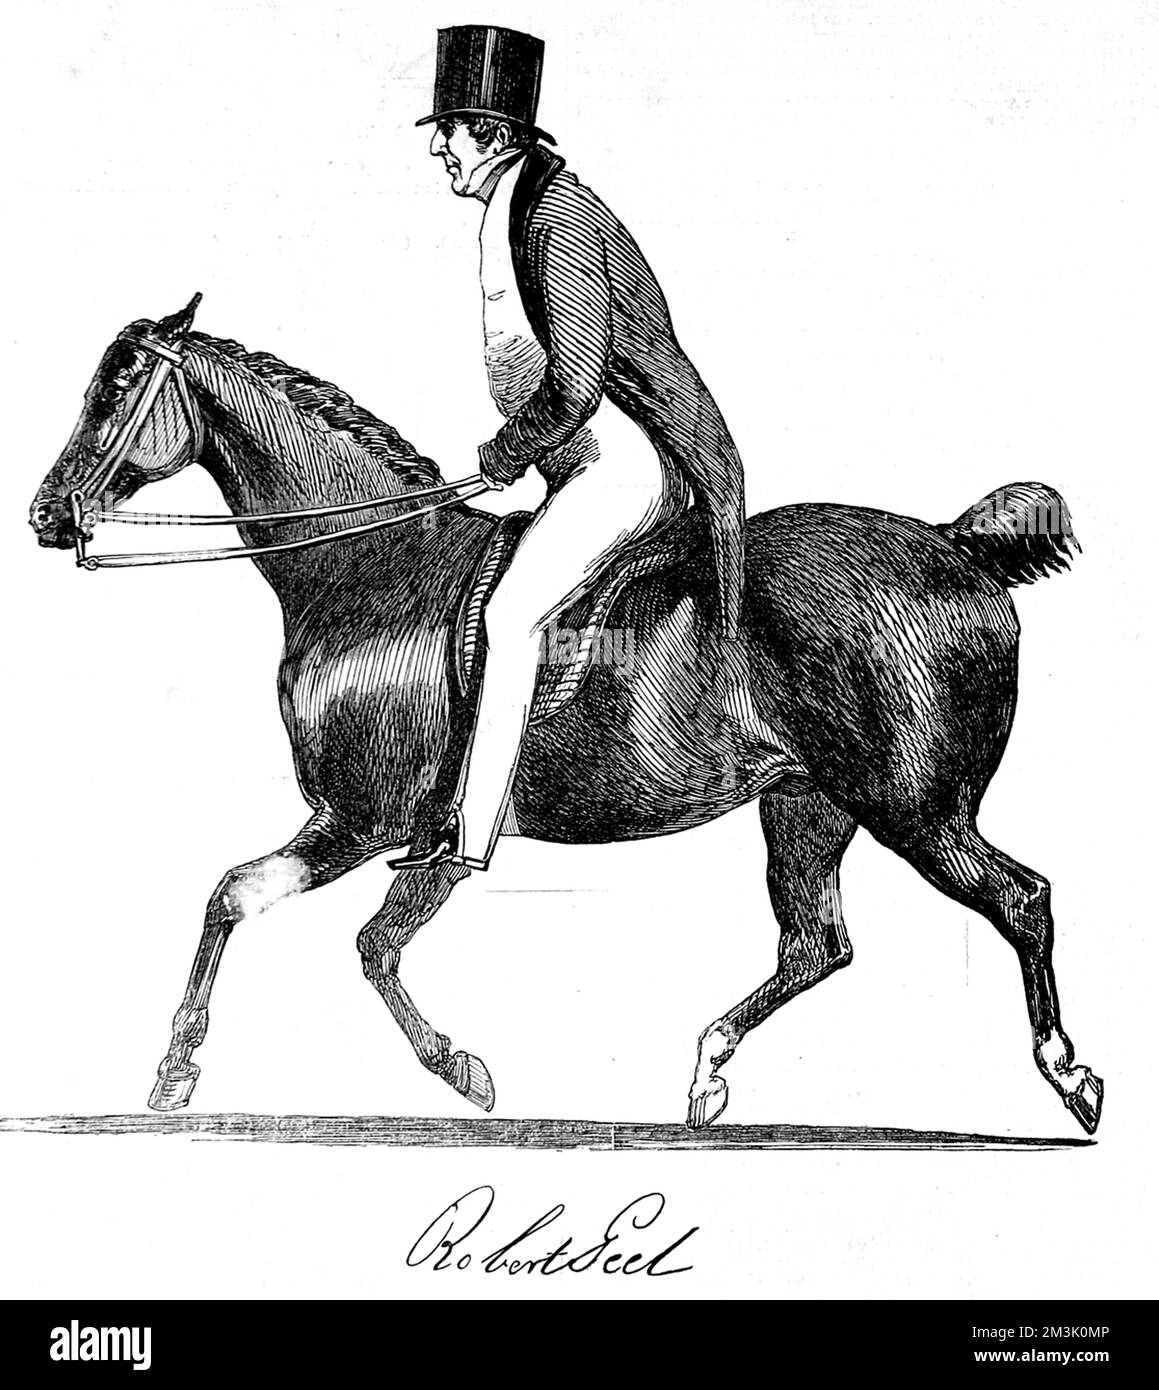 Sir Robert Peel (1788 - 1850),  English statesman and Prime Minister, on horseback.   Peel was a Conservative MP who held strong views on Irish Catholicism and Free Trade vs Protectionism, but is probably best remembered for organising the London Police Force in the 1820's. For a long time, British policemen were nicknamed 'Peelers' or 'Bobbies' in reference to Robert Peel.   On 29th June 1850, Peel was thrown from his horse and sustained fatal injuries. Stock Photo